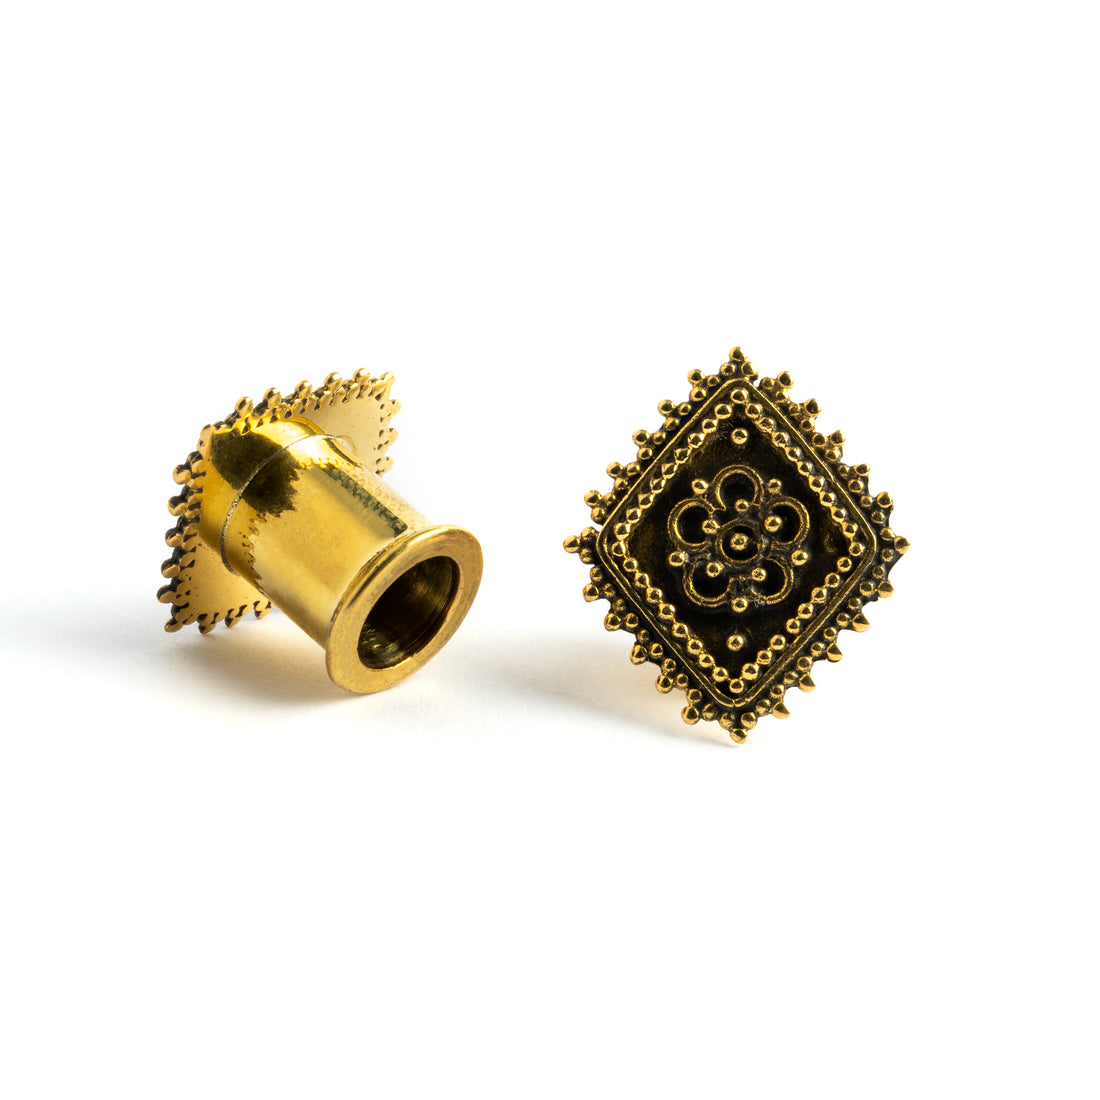 Lozenge brass plugs for stretched ears front and back view